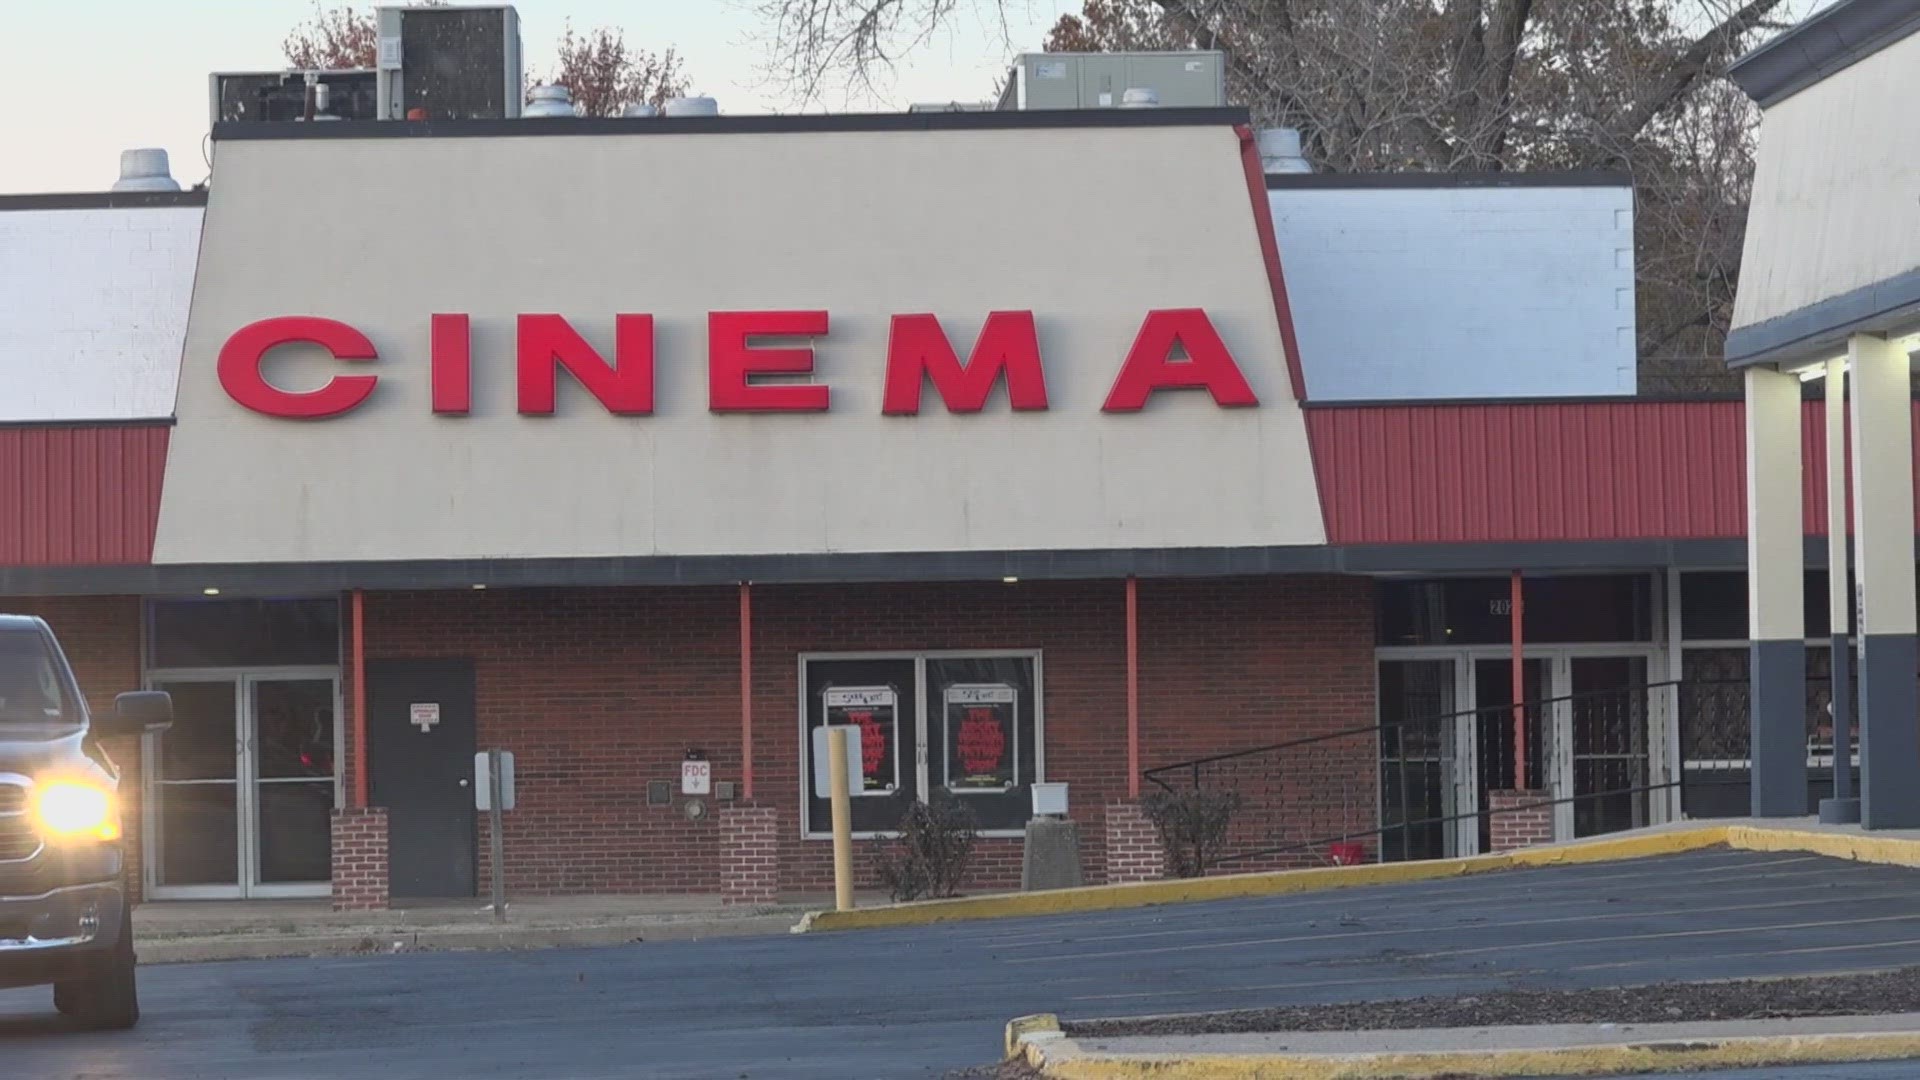 A fire in 2019 made the St. Andrews Cinema take a years-long pause. Now, the theater is back with a bang.